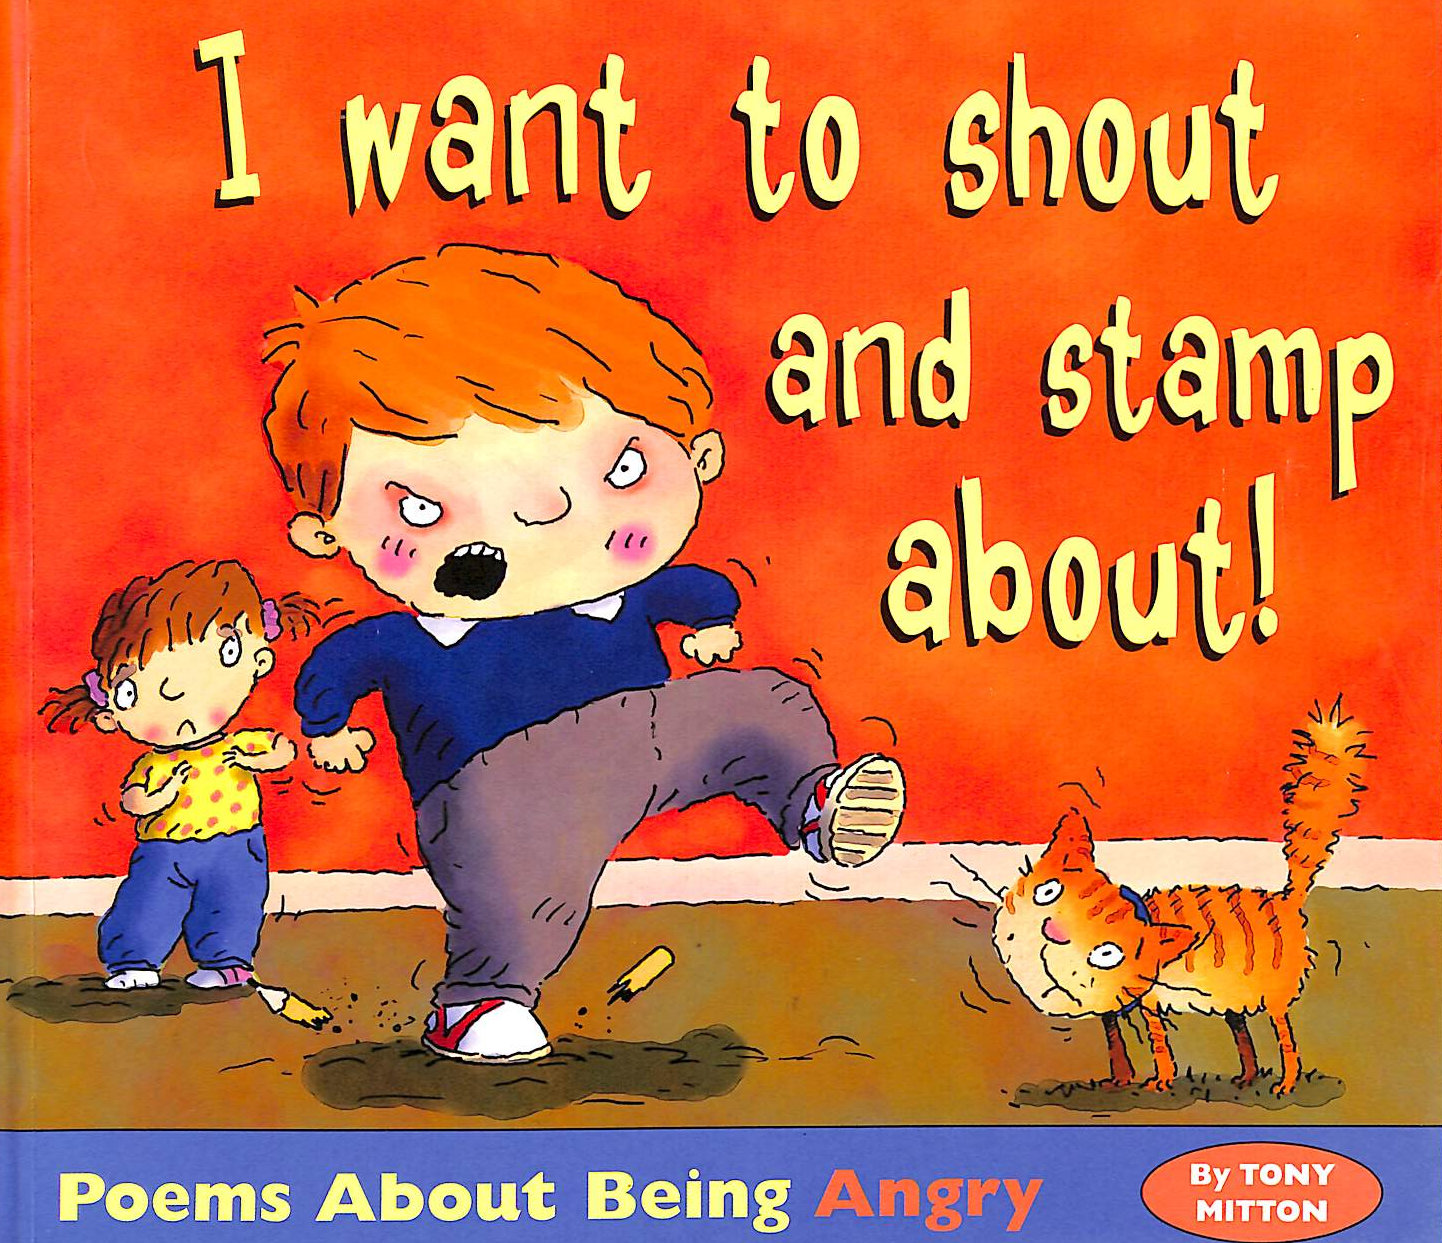 MITTON, TONY; - Poems About Being Angry - I Want To Shout and Stamp About (Poemotions)